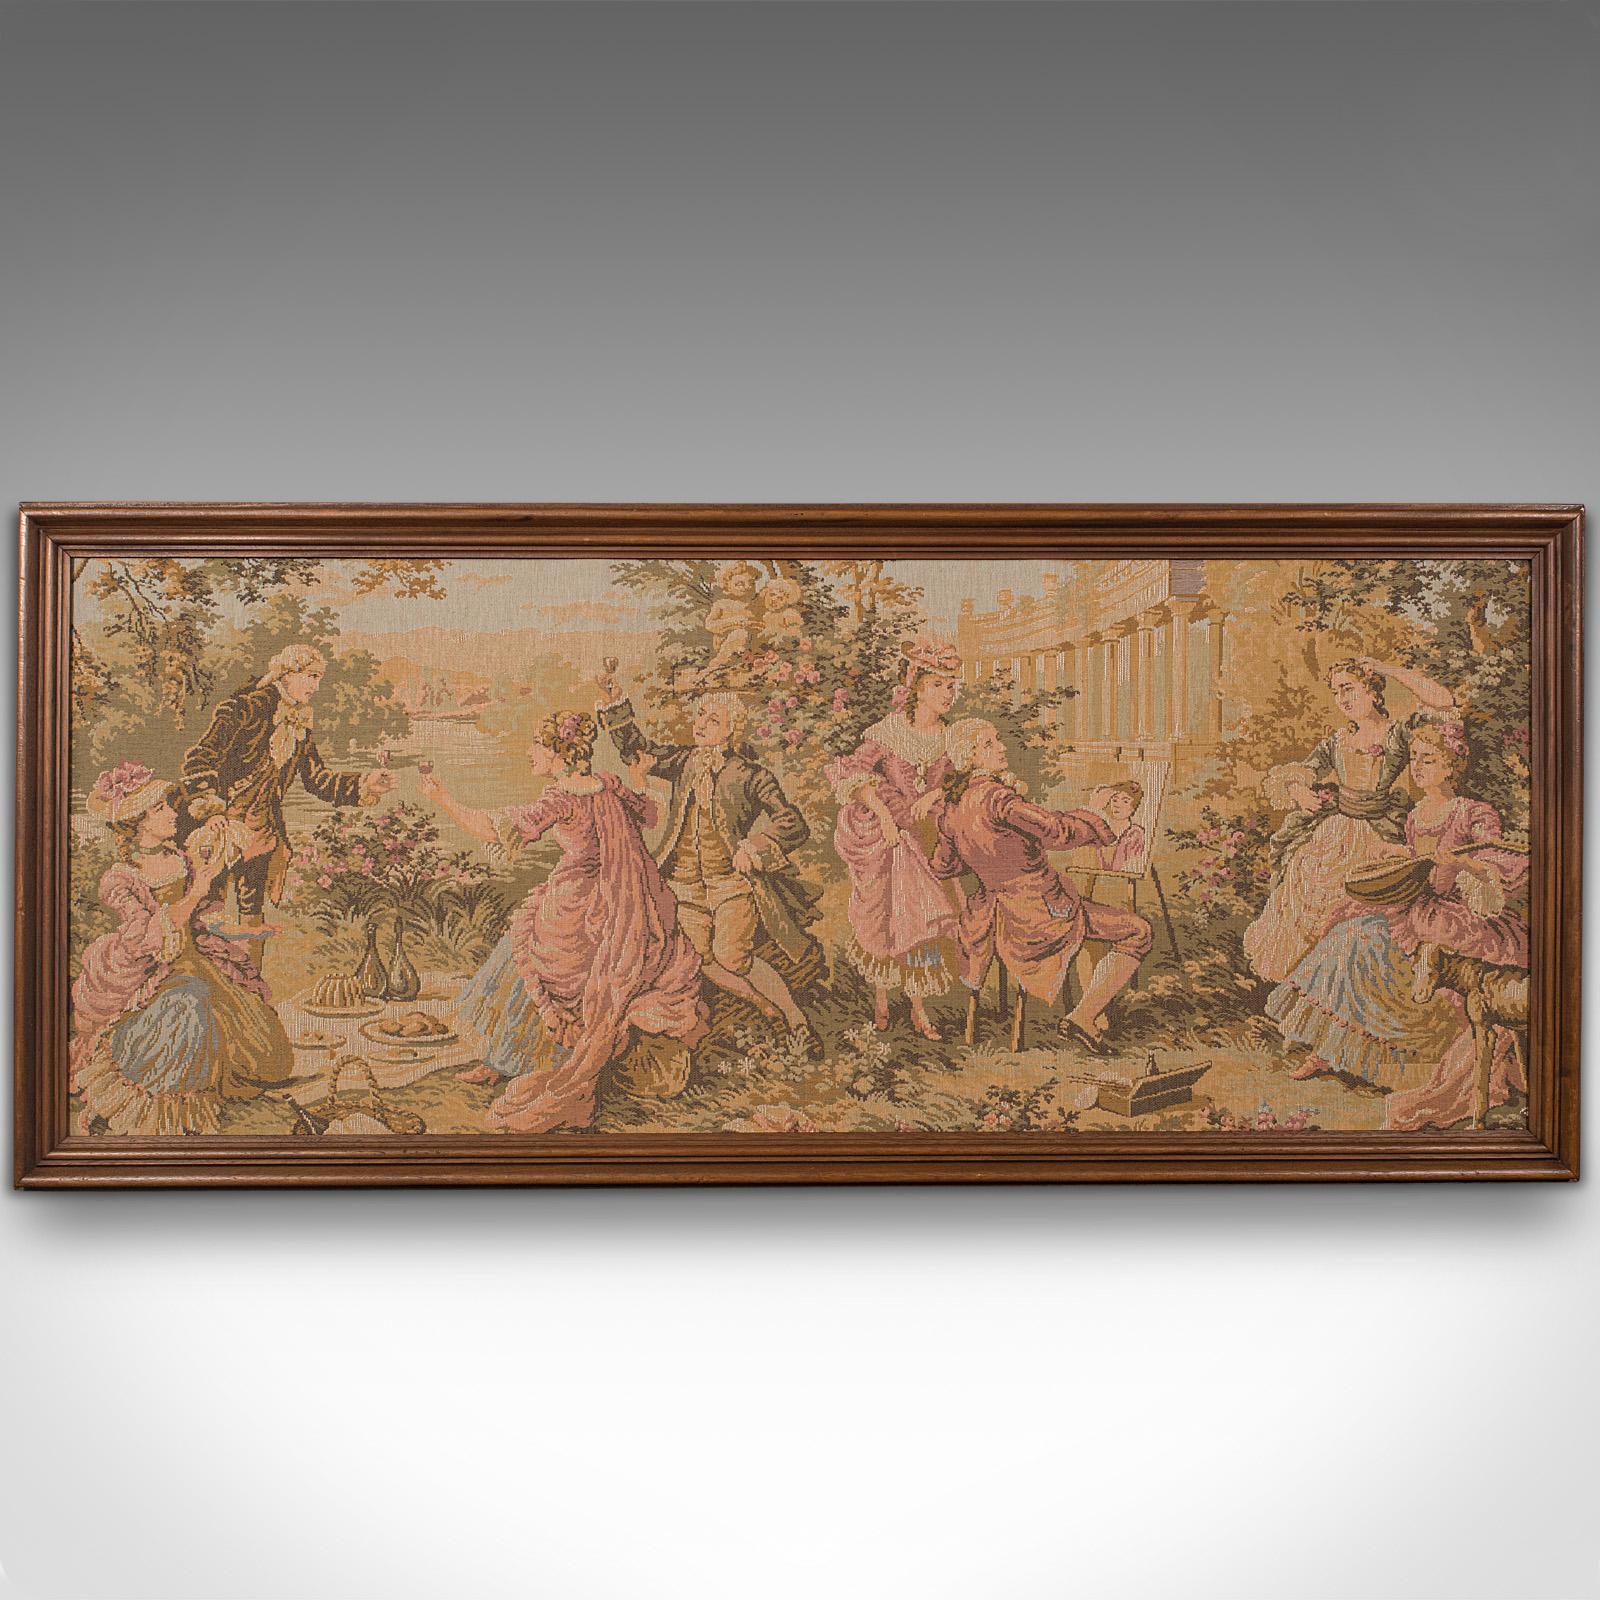 This is a vintage panoramic tapestry. A Continental, needlepoint display panel with mahogany frame, dating to the early 20th century, circa 1930.

Generous proportion, presenting a classical scene
Displays a desirable aged patina